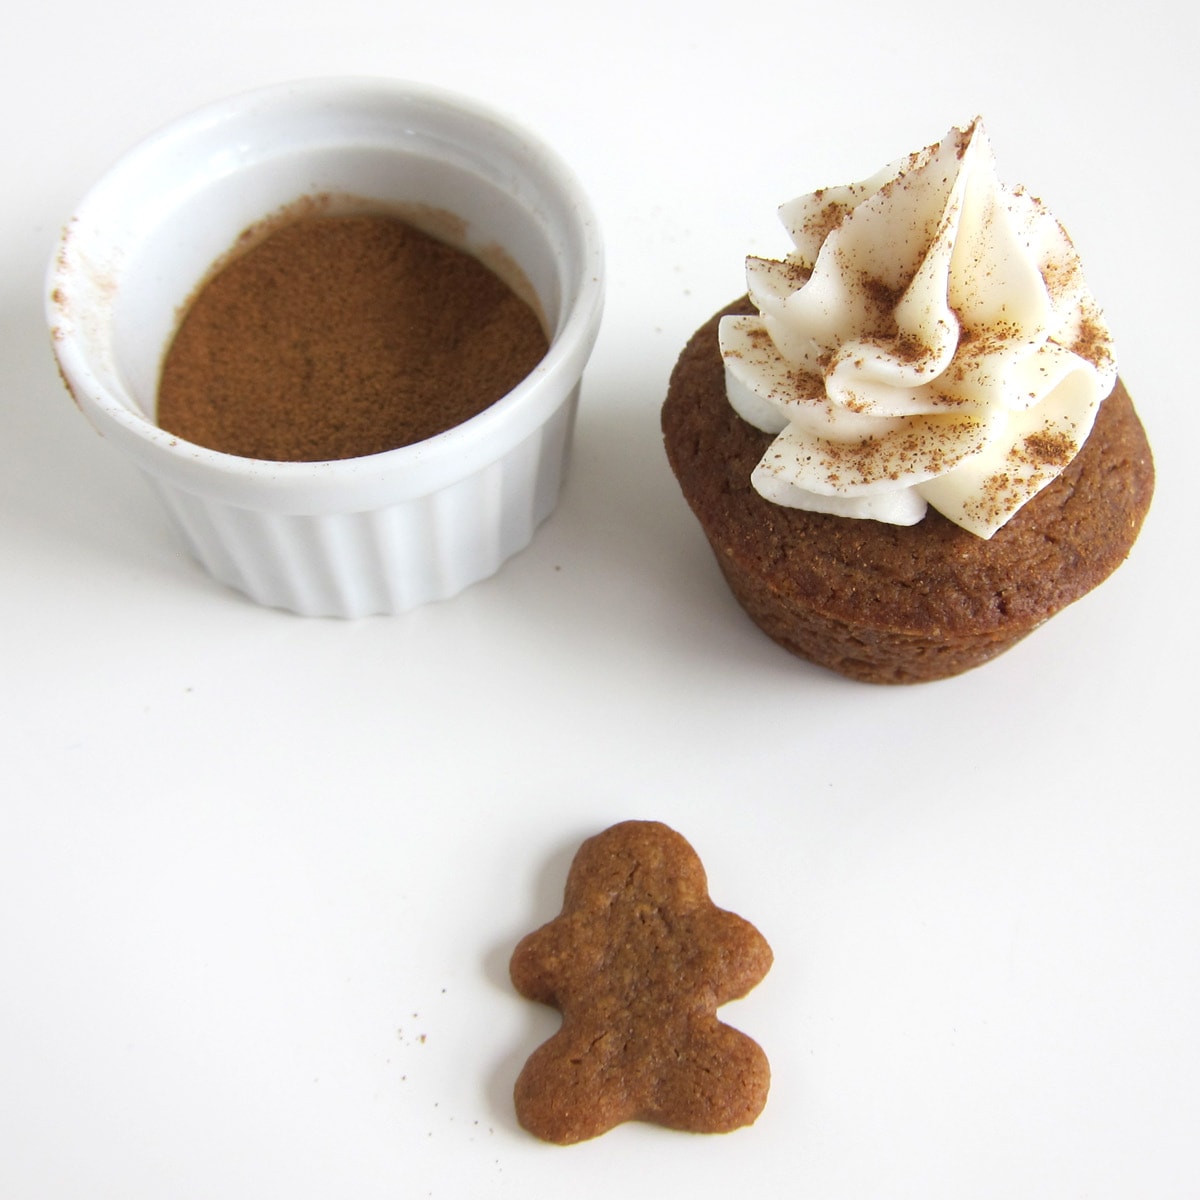 a white chocolate frosting swirl on top of a mini gingerbread cookie cup is sprinkled with cinnamon.